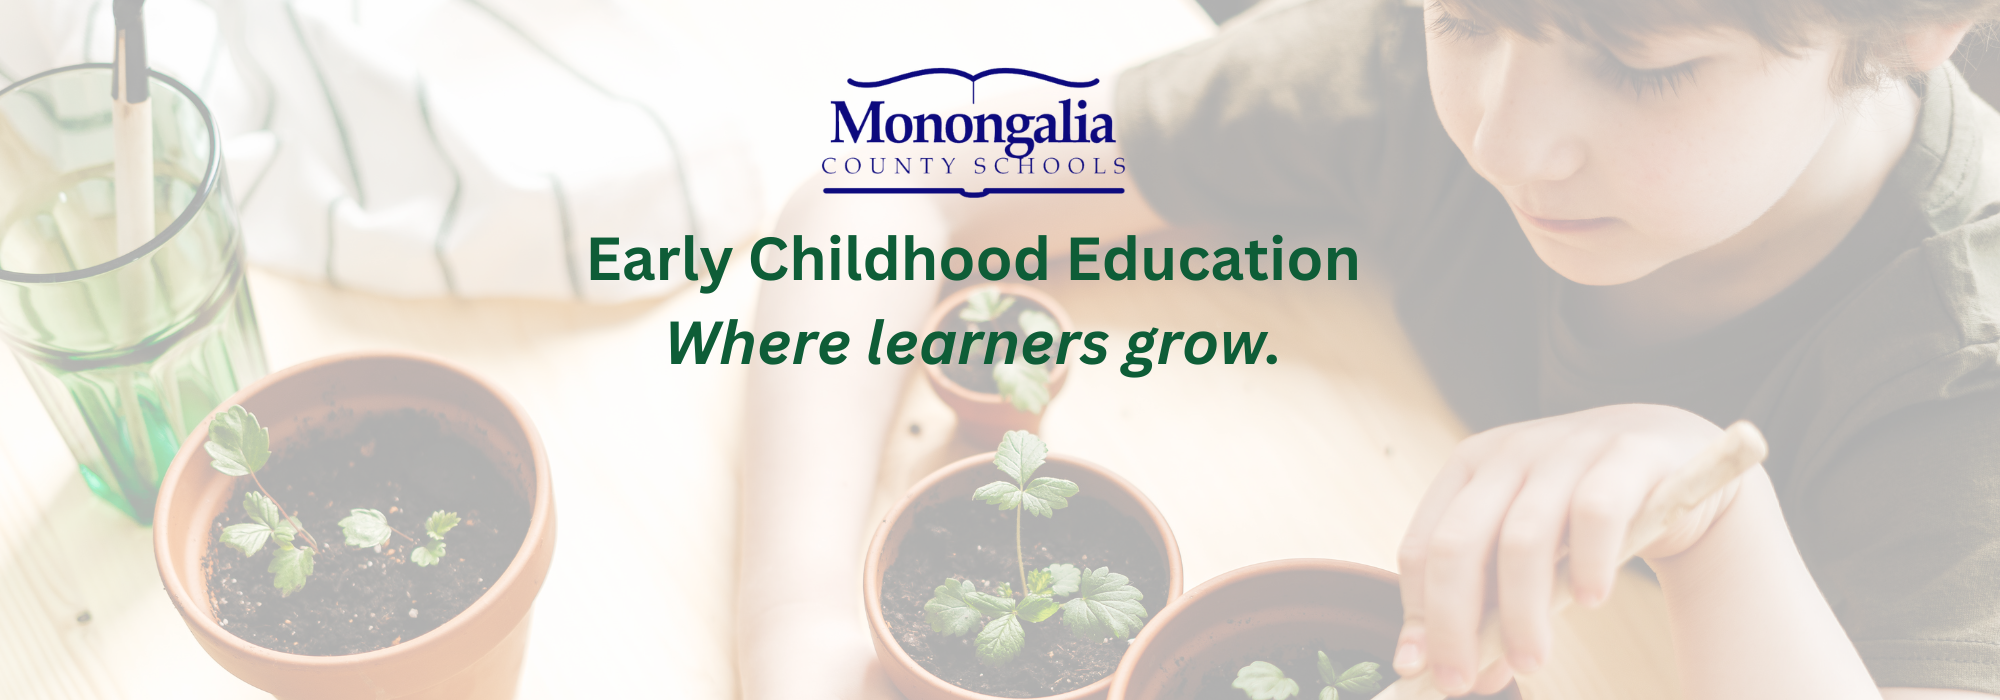 child potting green plants in terracotta pots. Green Text says Early Childhood Education Where learners grow. 